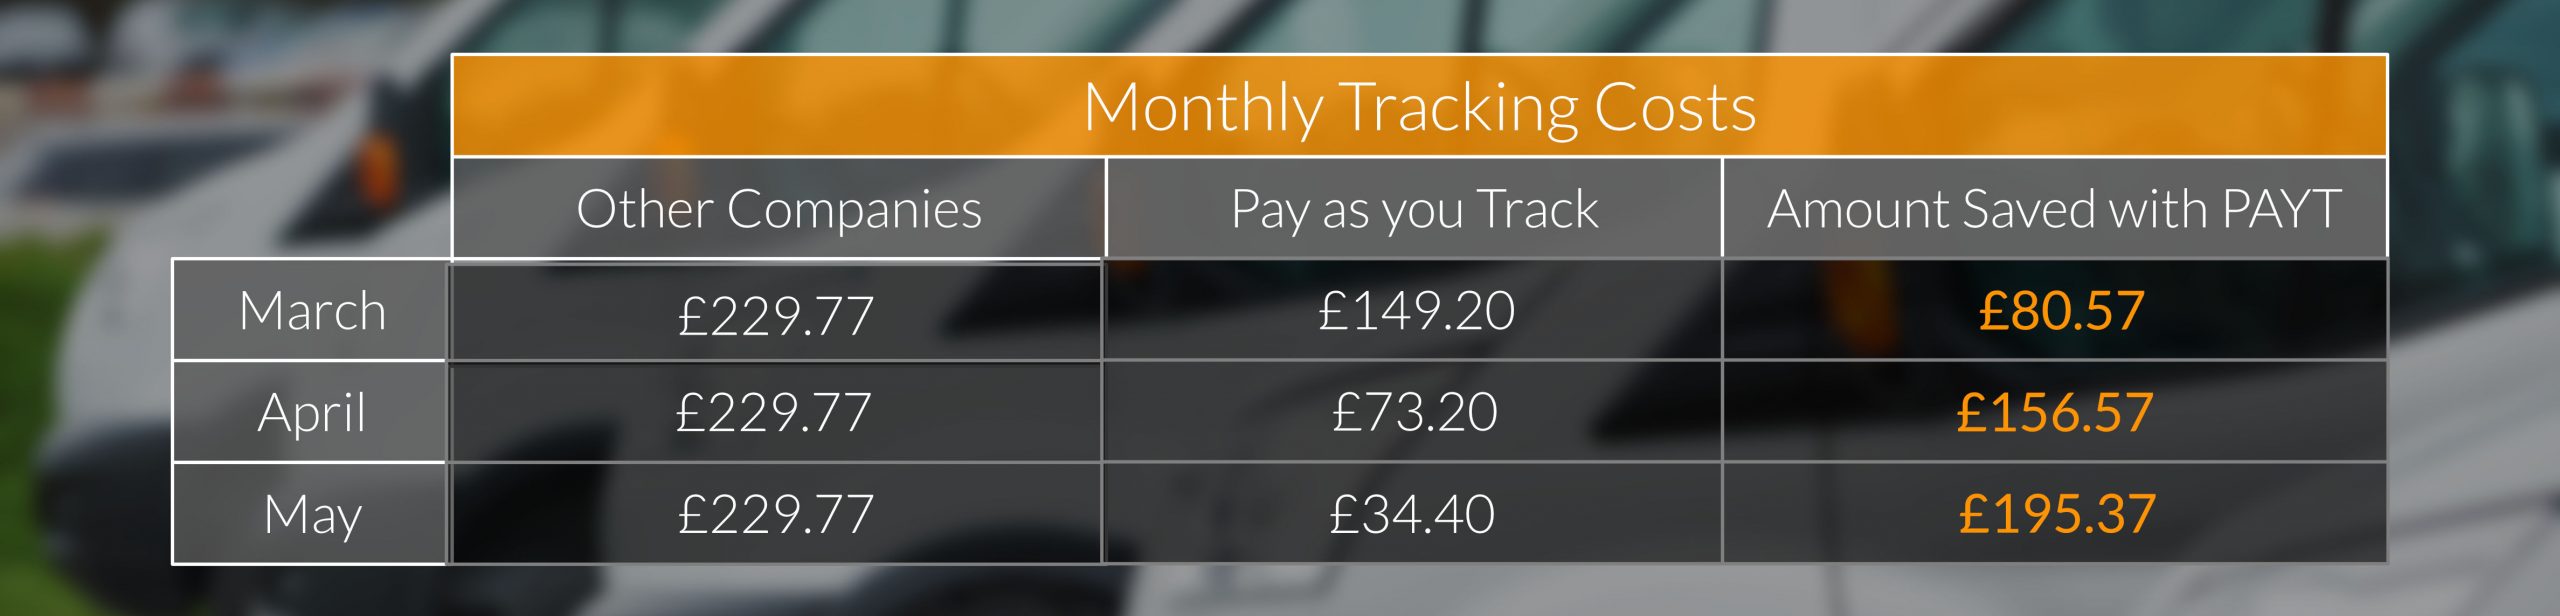 Vehicle Tracking Cost in 2020